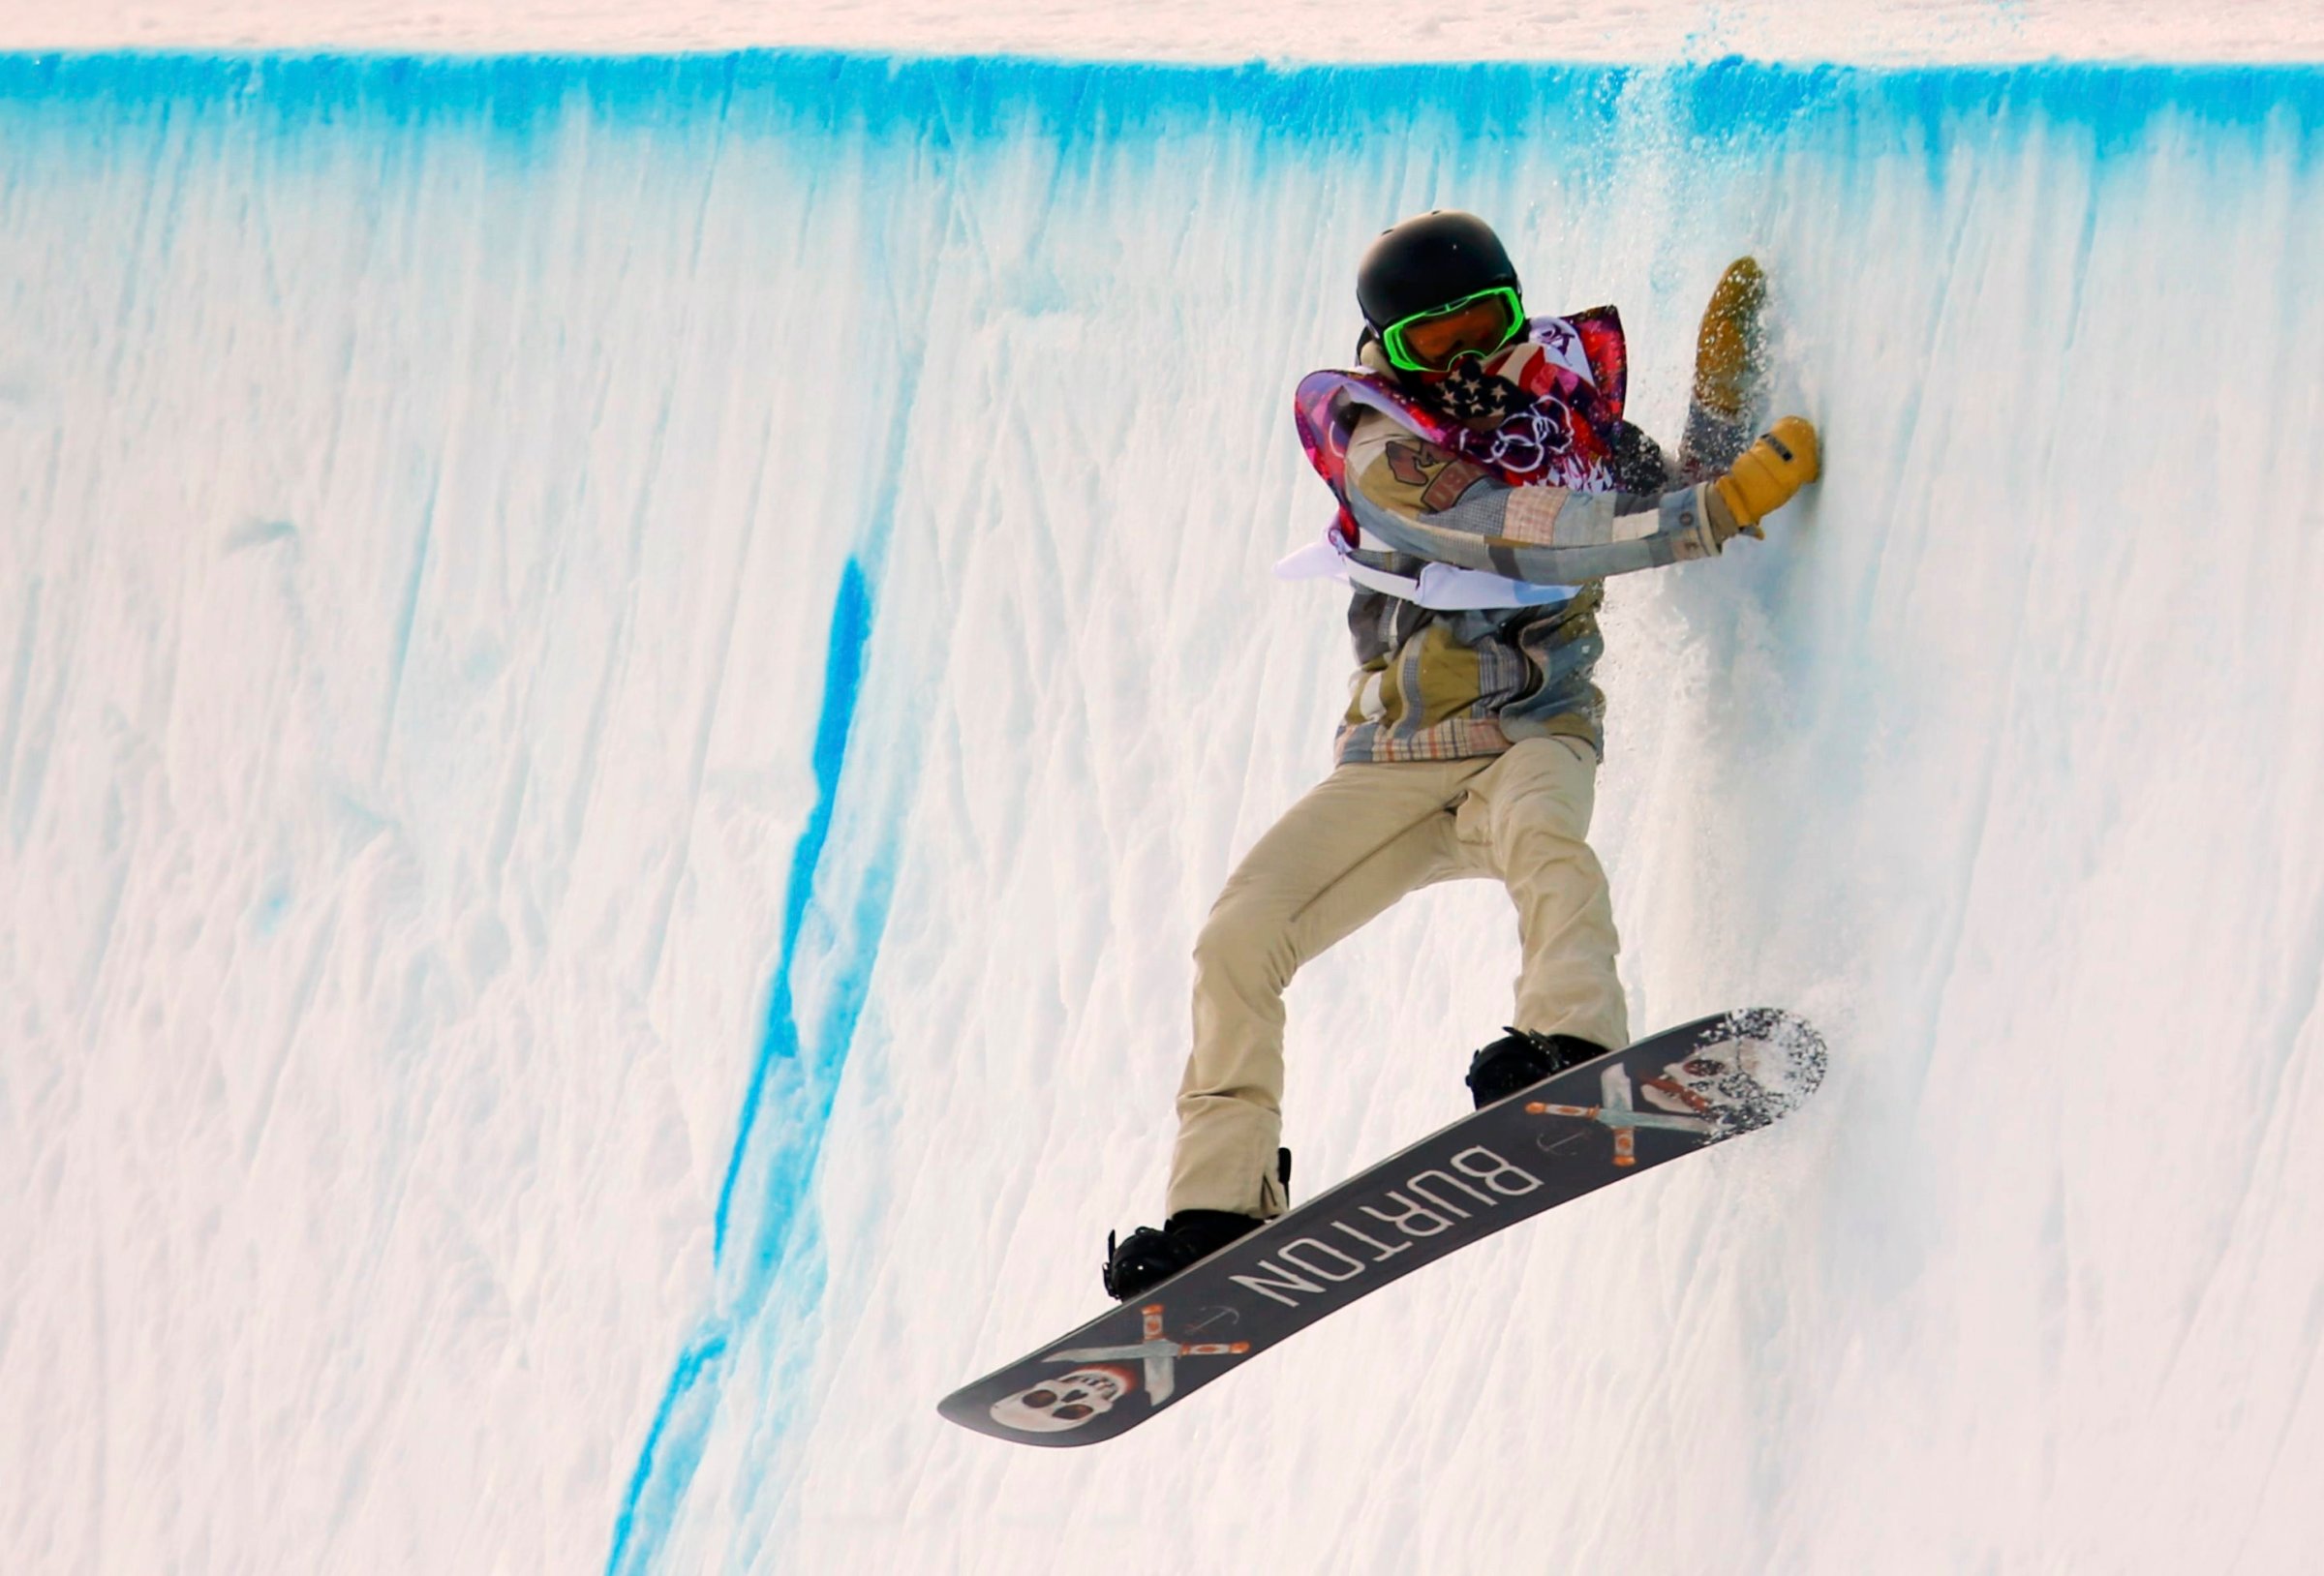 Shaun White of the U.S. competes during the men's snowboard halfpipe qualification round.